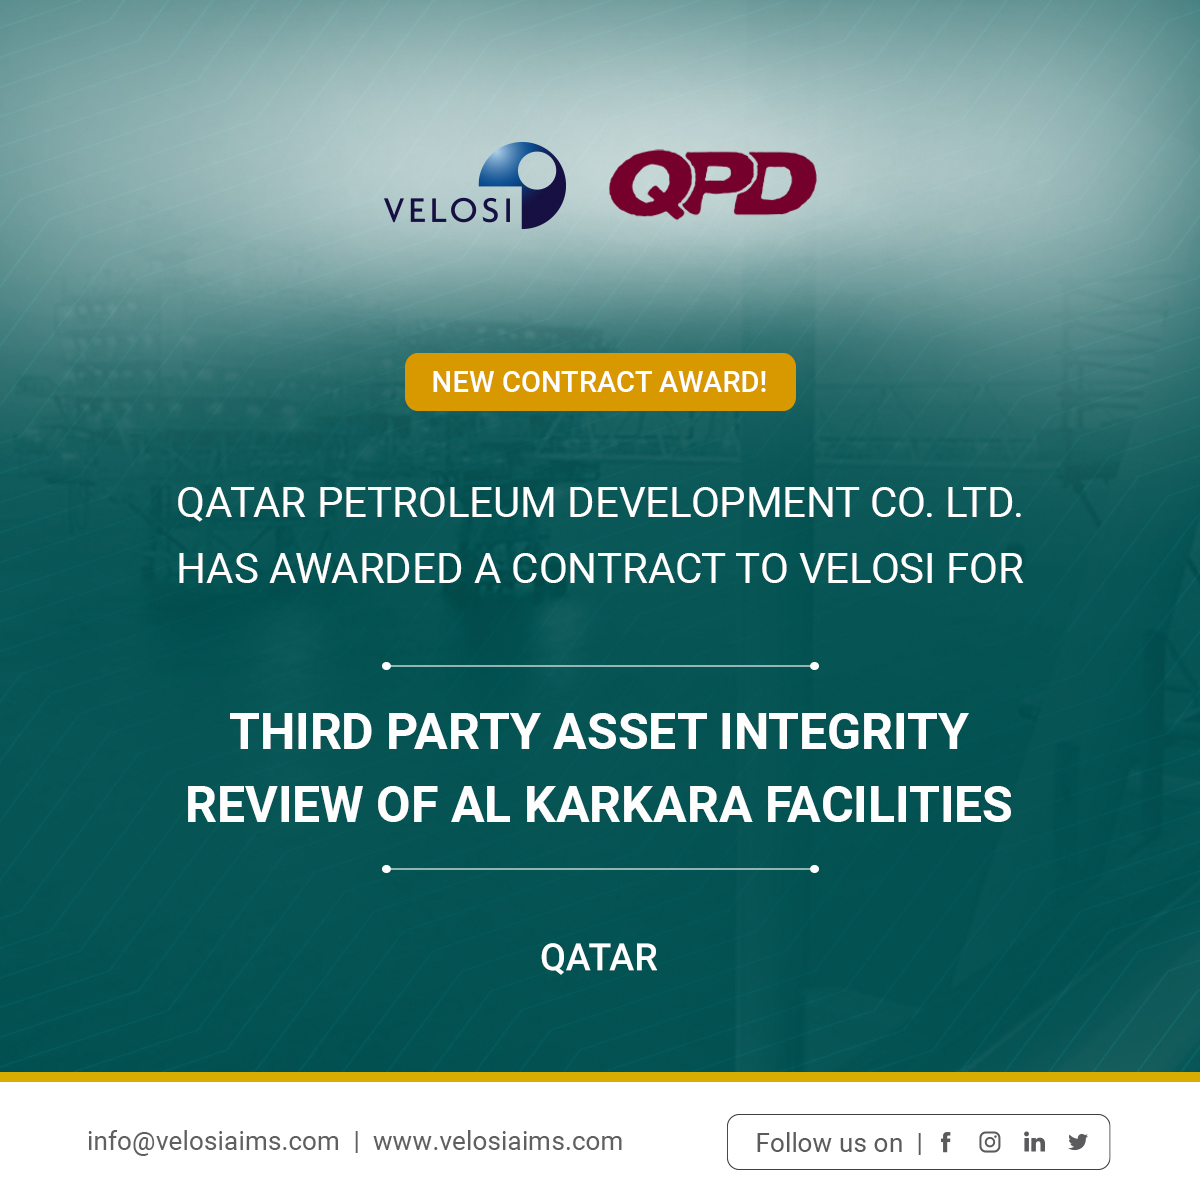 Third Party Asset Integrity Review